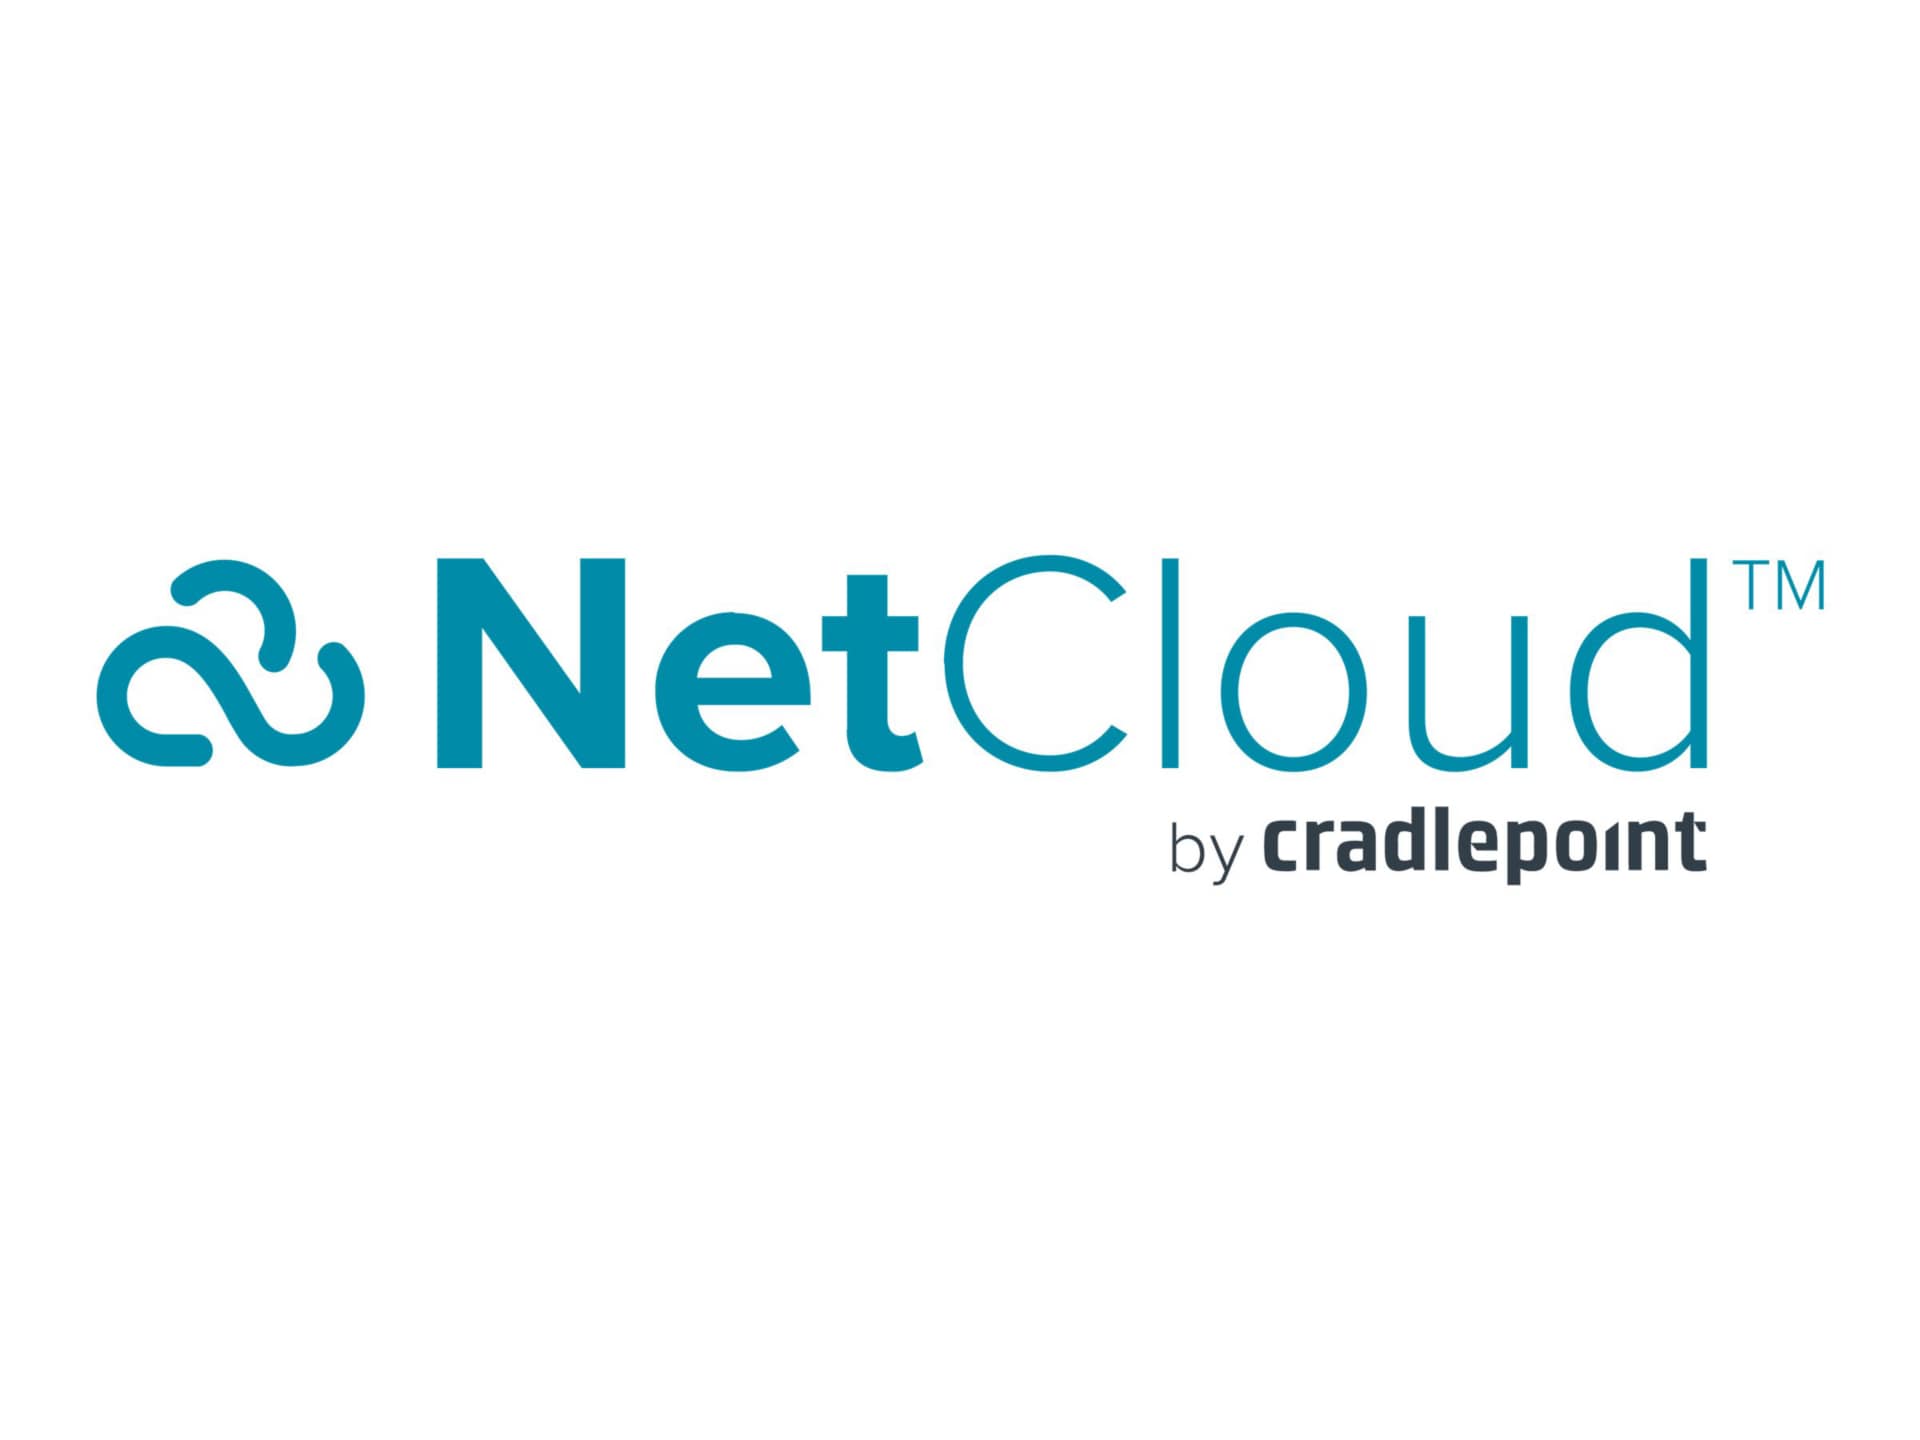 Cradlepoint NetCloud Enterprise Branch Essentials + Advanced Plan - subscription license (5 years) - 1 license - with